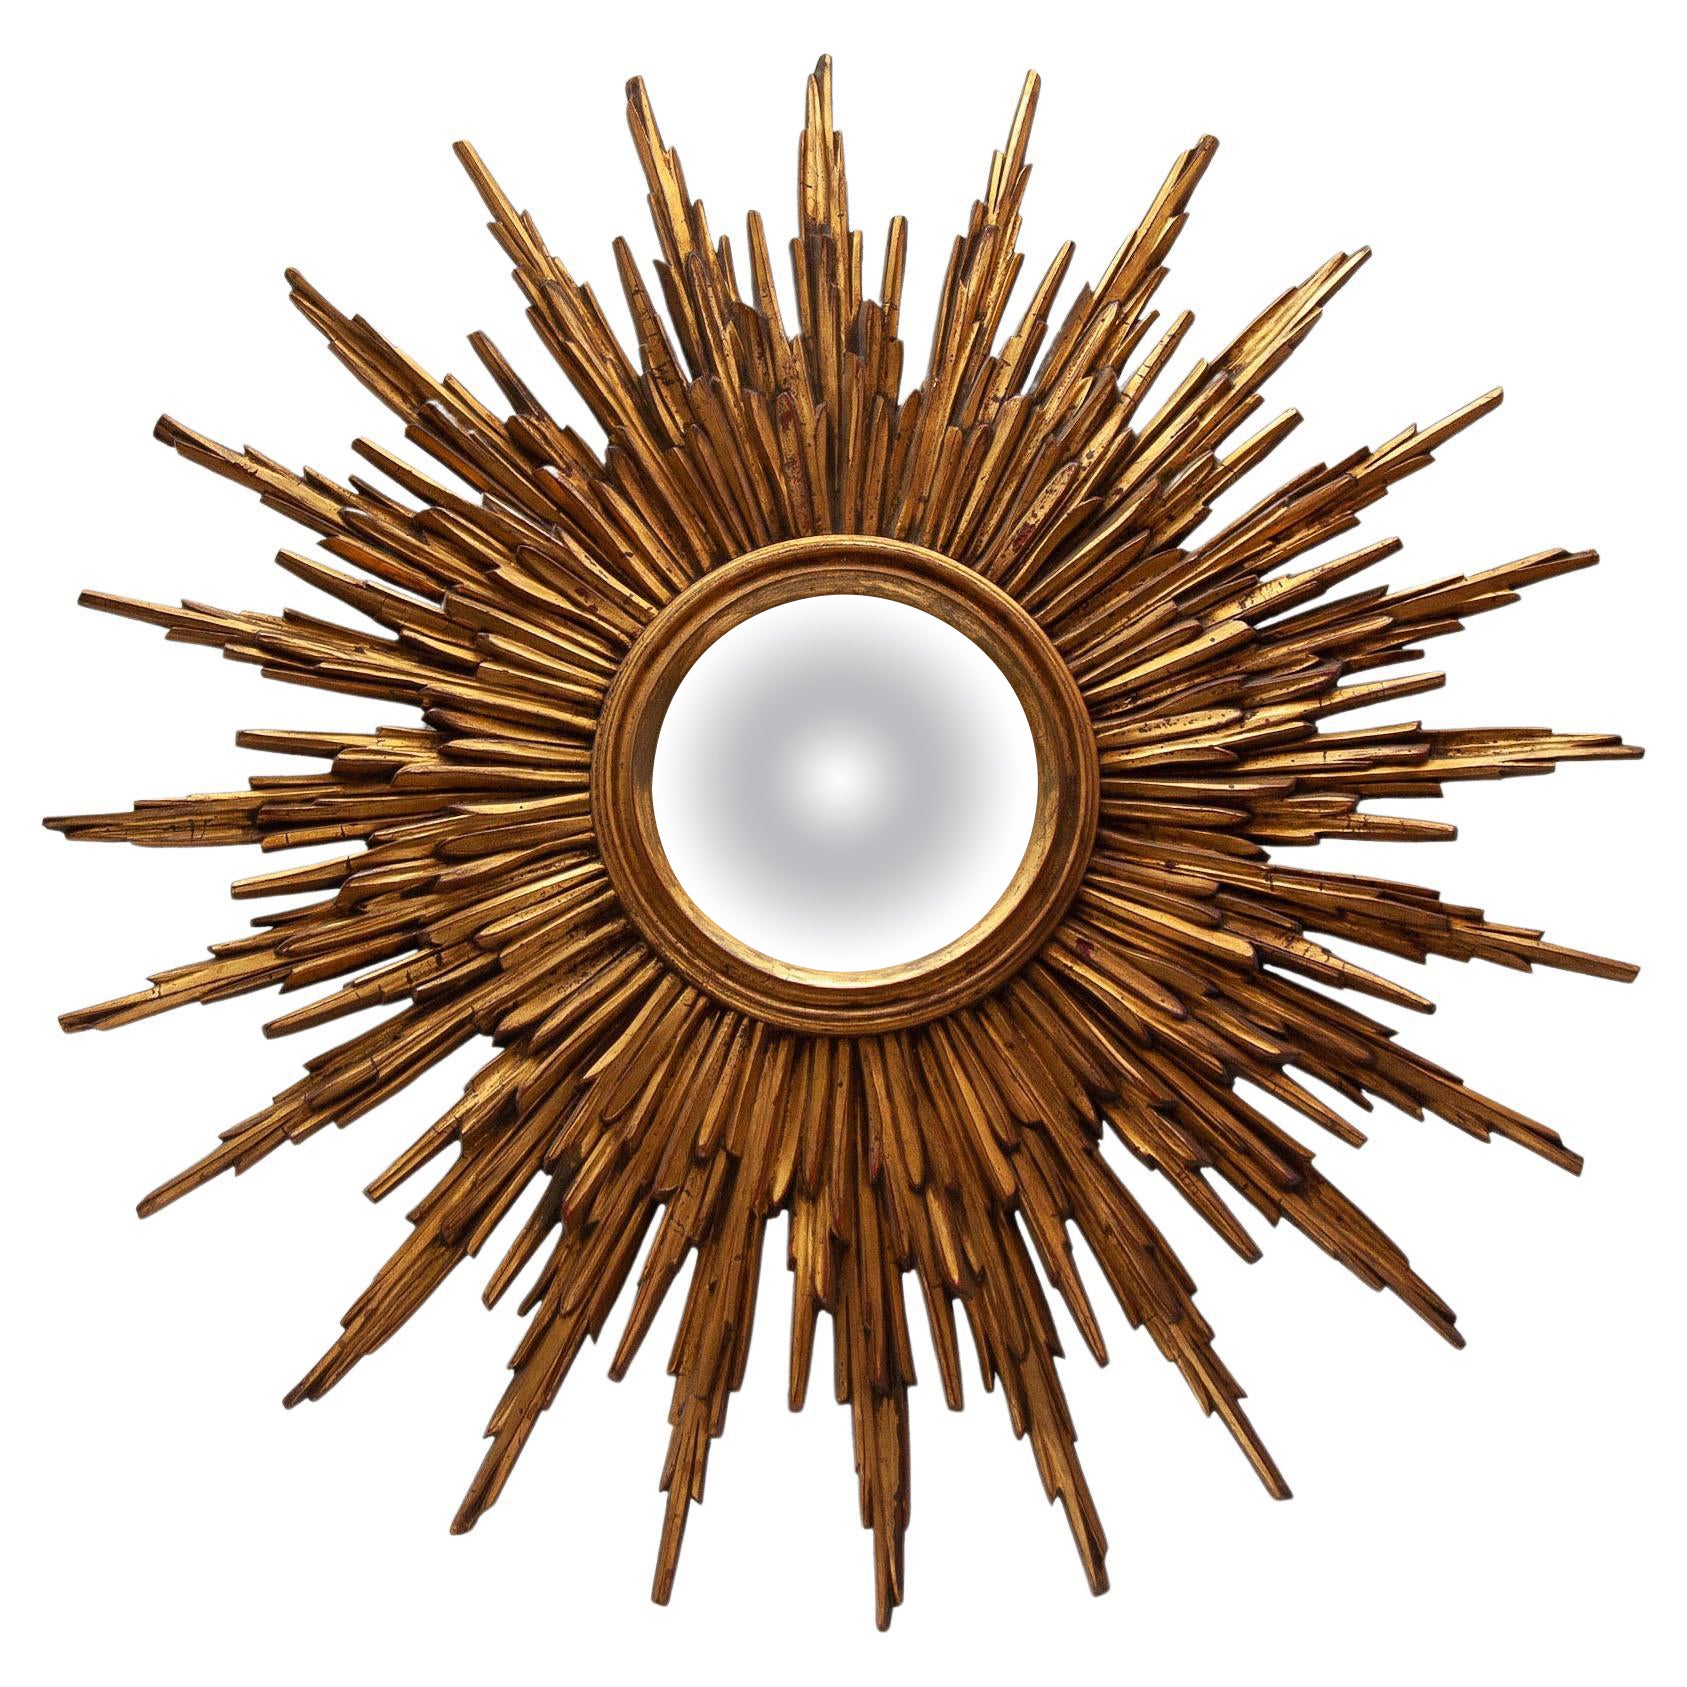 Large Sunburst 1930s Wall Mirror Made of Gold-Plated Wood